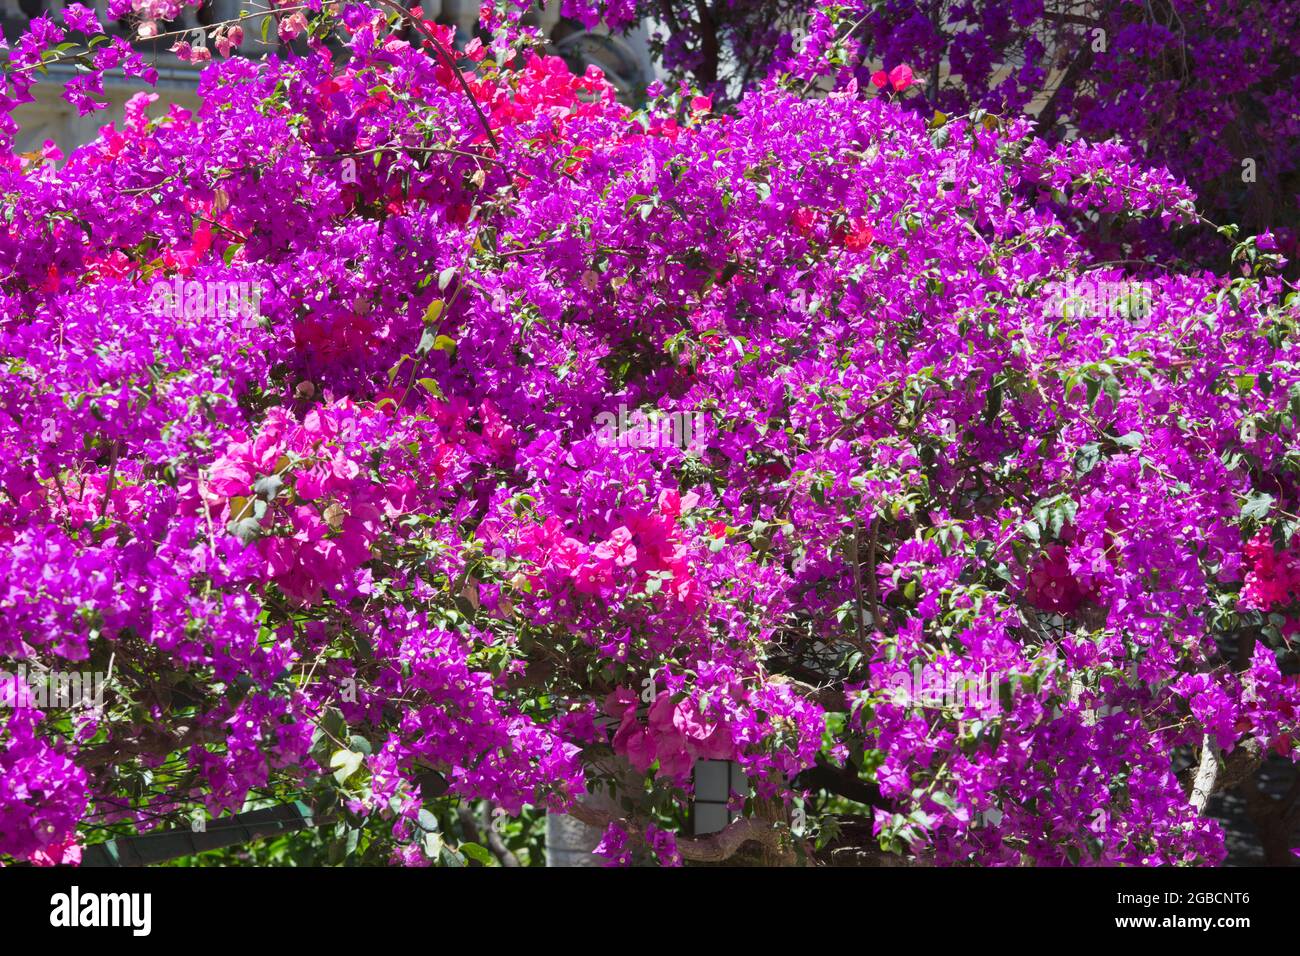 Taormina, Messina, Sicily, Italy. Attractive canopy of pink bougainvillea adorning typical pergola in the heart of the Old Town. Stock Photo